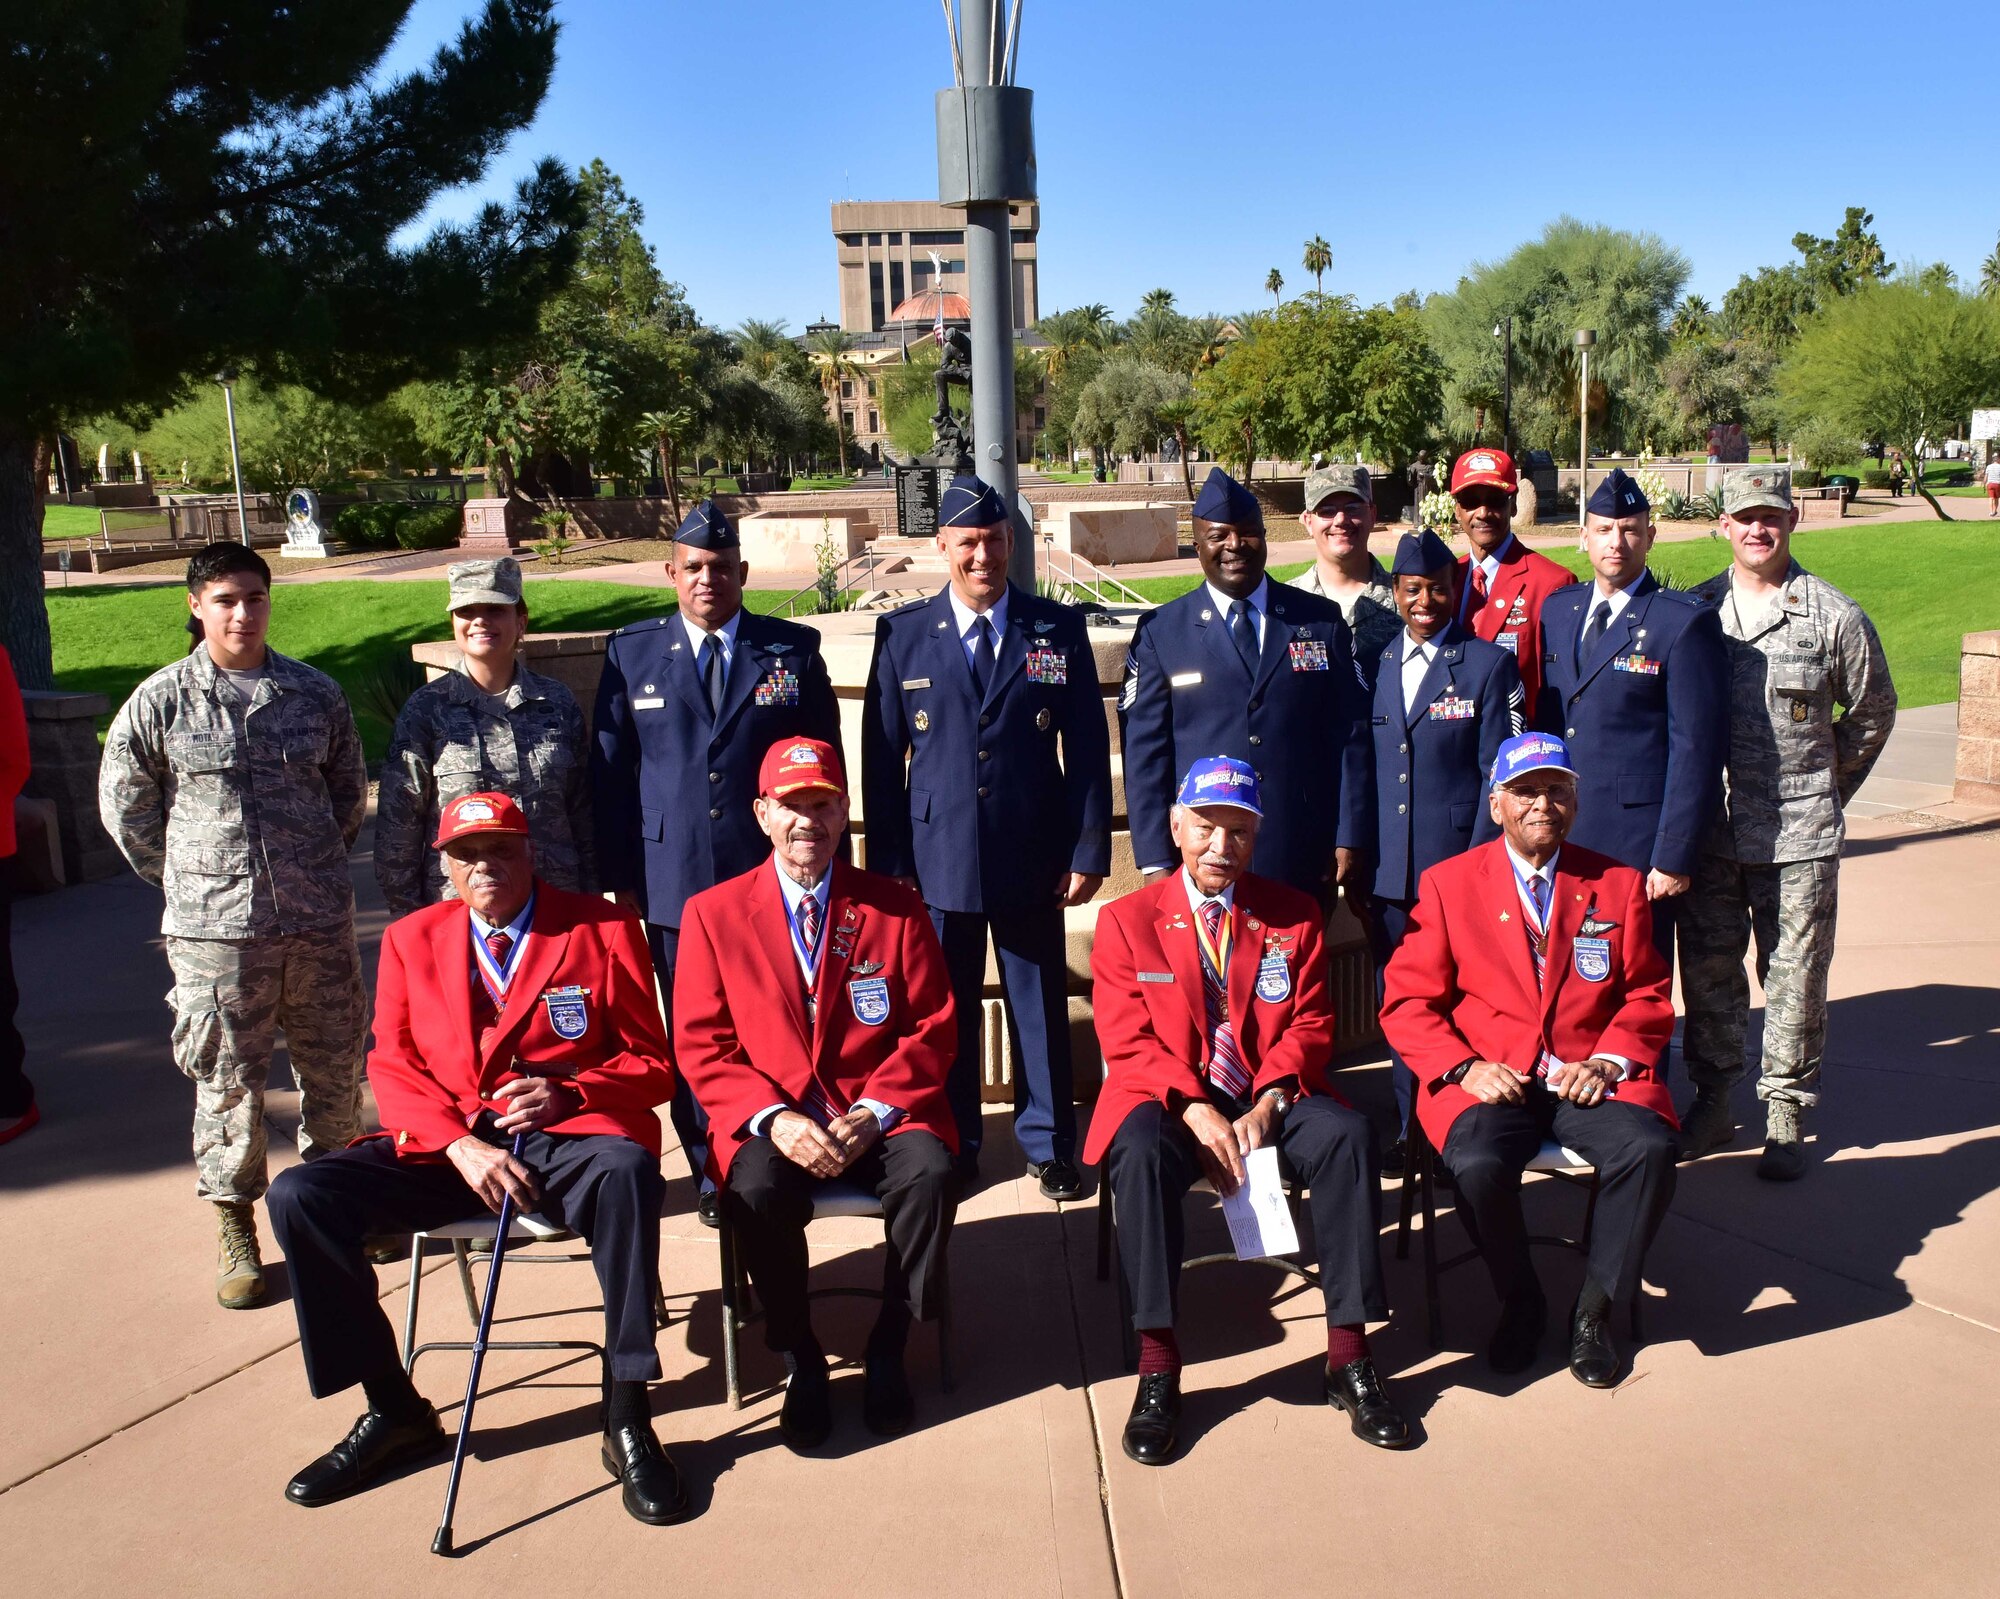 Brig. Gen. Brook Leonard, 56th Fighter Wing commander, stands in a group photo Nov. 11 with four of the original Tuskegee Airmen and 56th and 944th Fighter Wing Airmen stationed at Luke Air Force Base, Ariz. (U.S. Air Force photo by Tech. Sgt. Louis Vega Jr.)